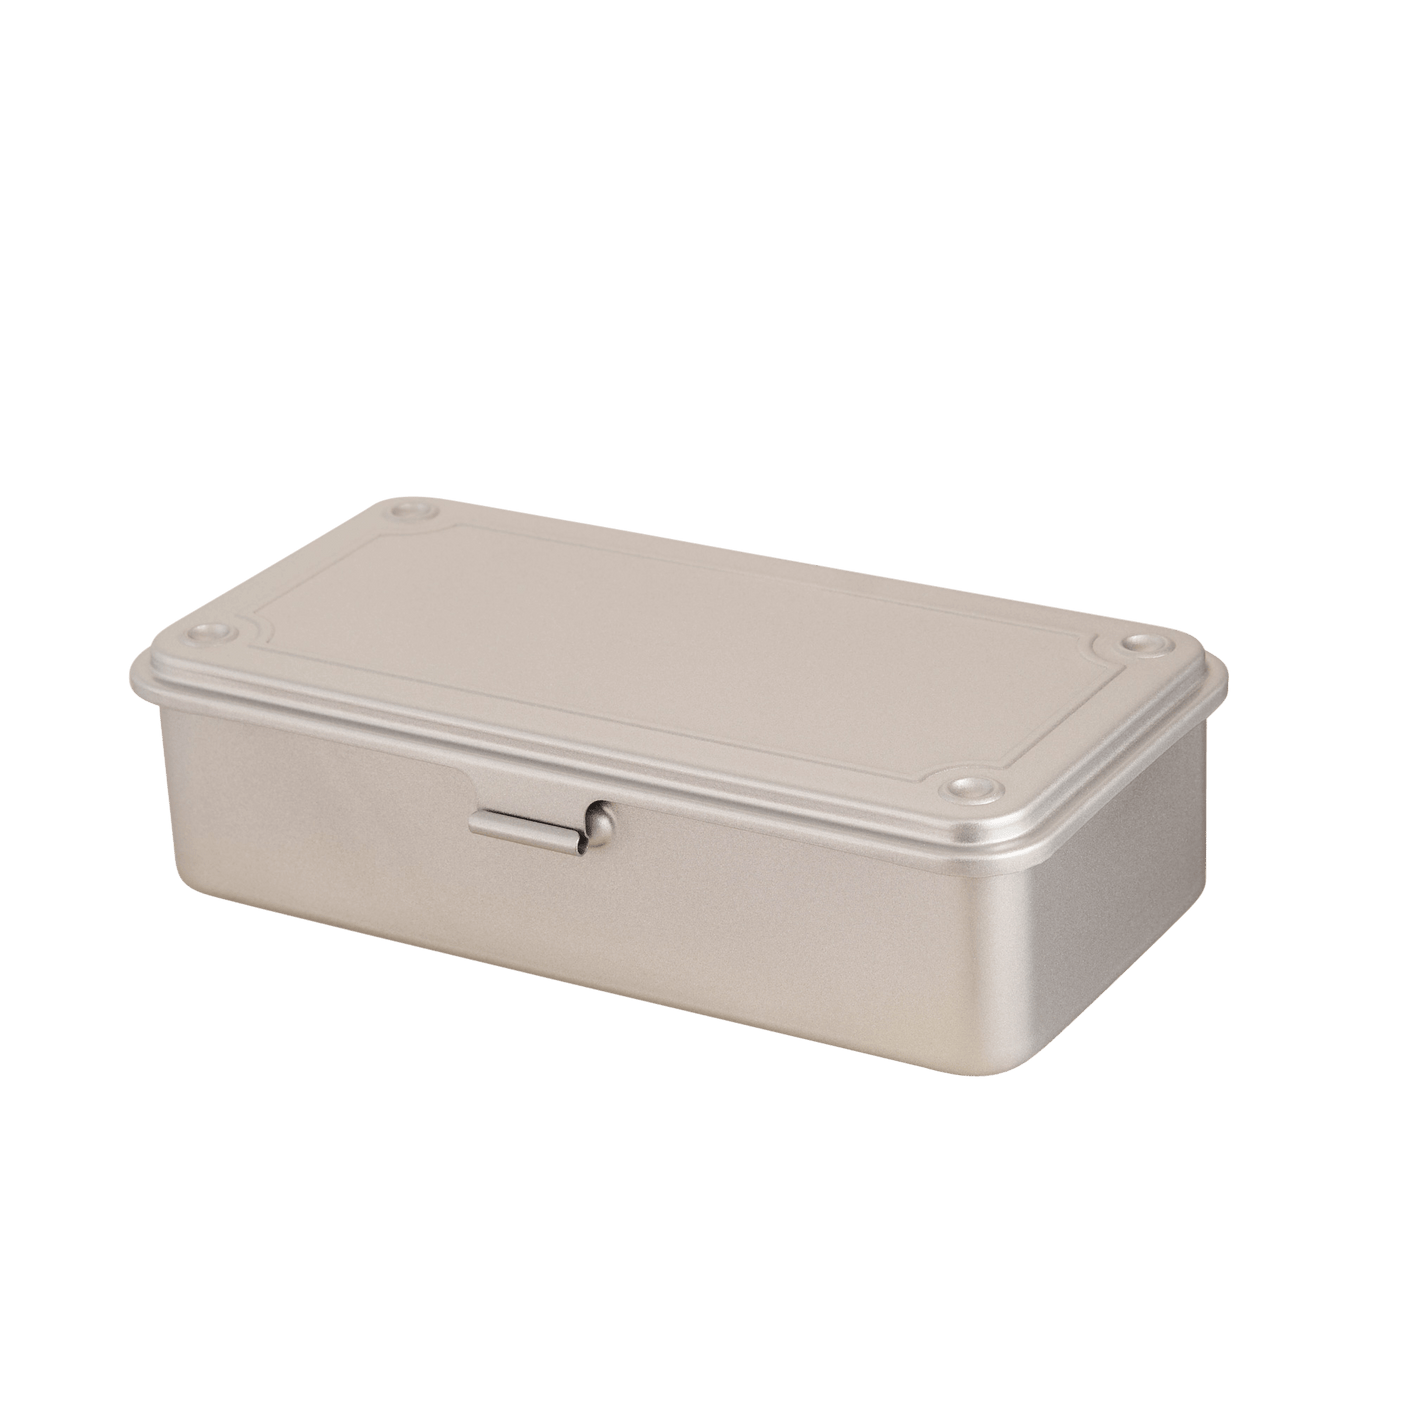 TOYO Trunk Shape Toolbox T-190 SV (Silver) - Tool Bags Boxes and Rolls - Japanese Tools Australia